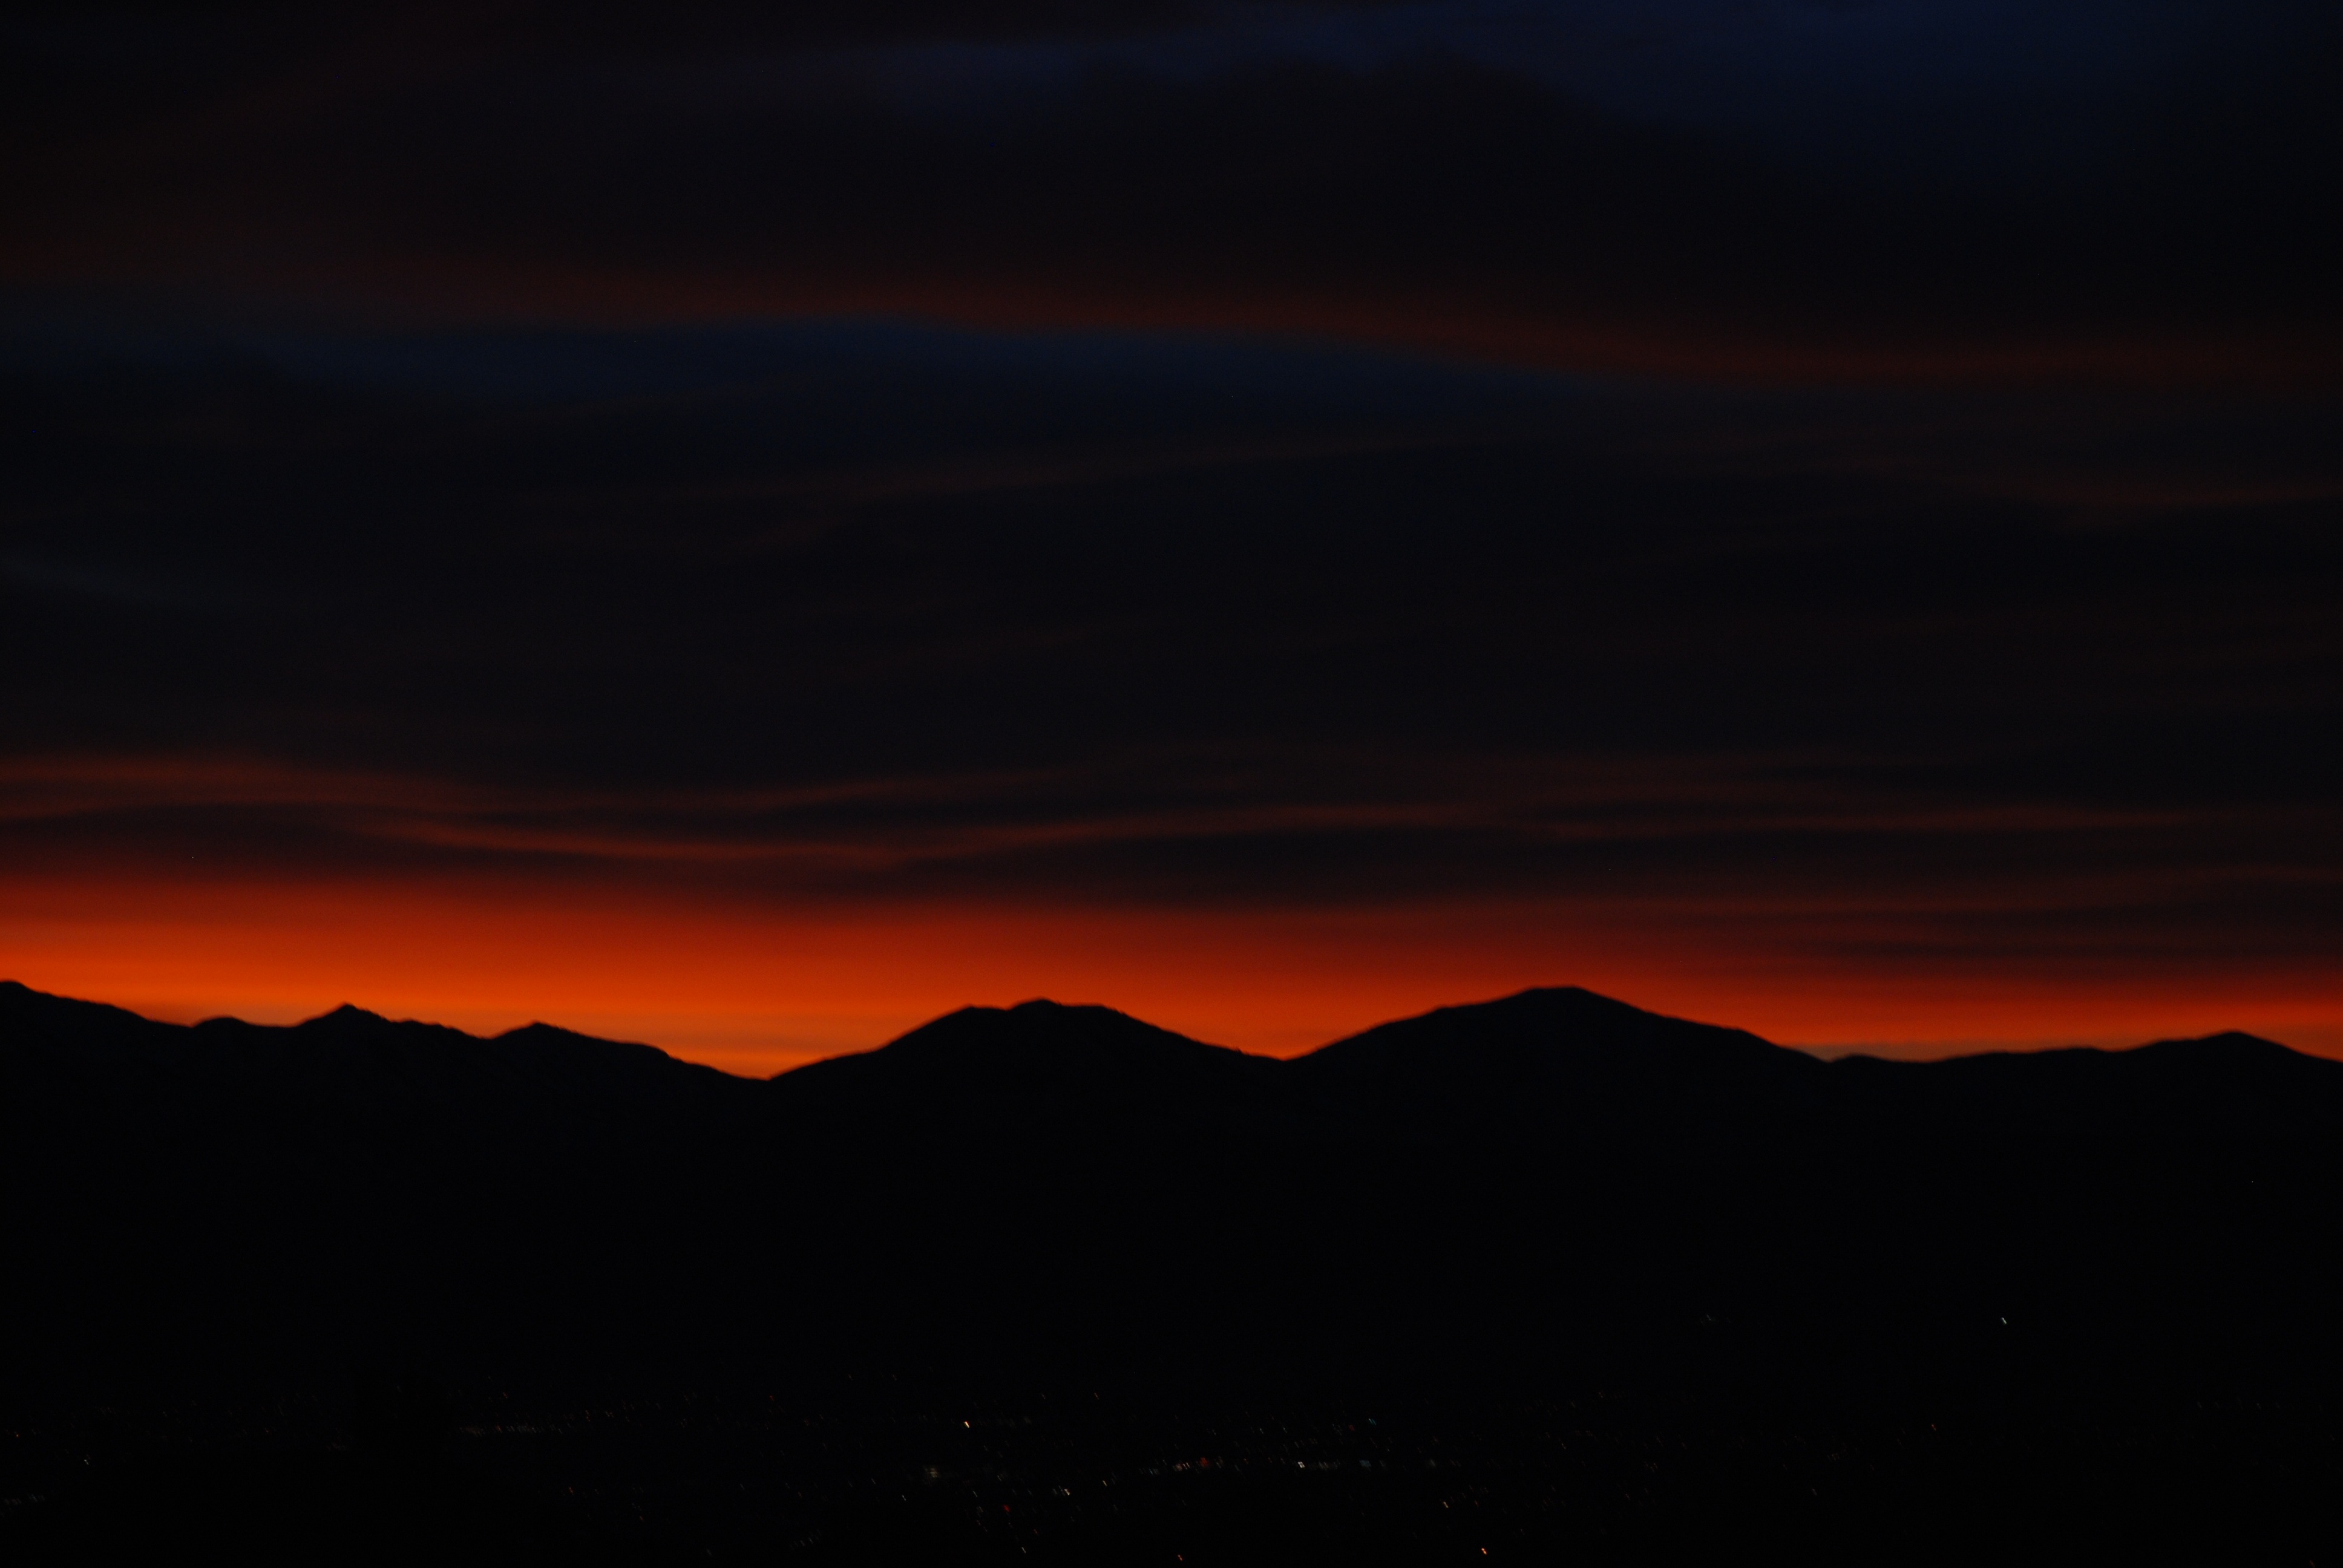 Red sky in the dark free image download